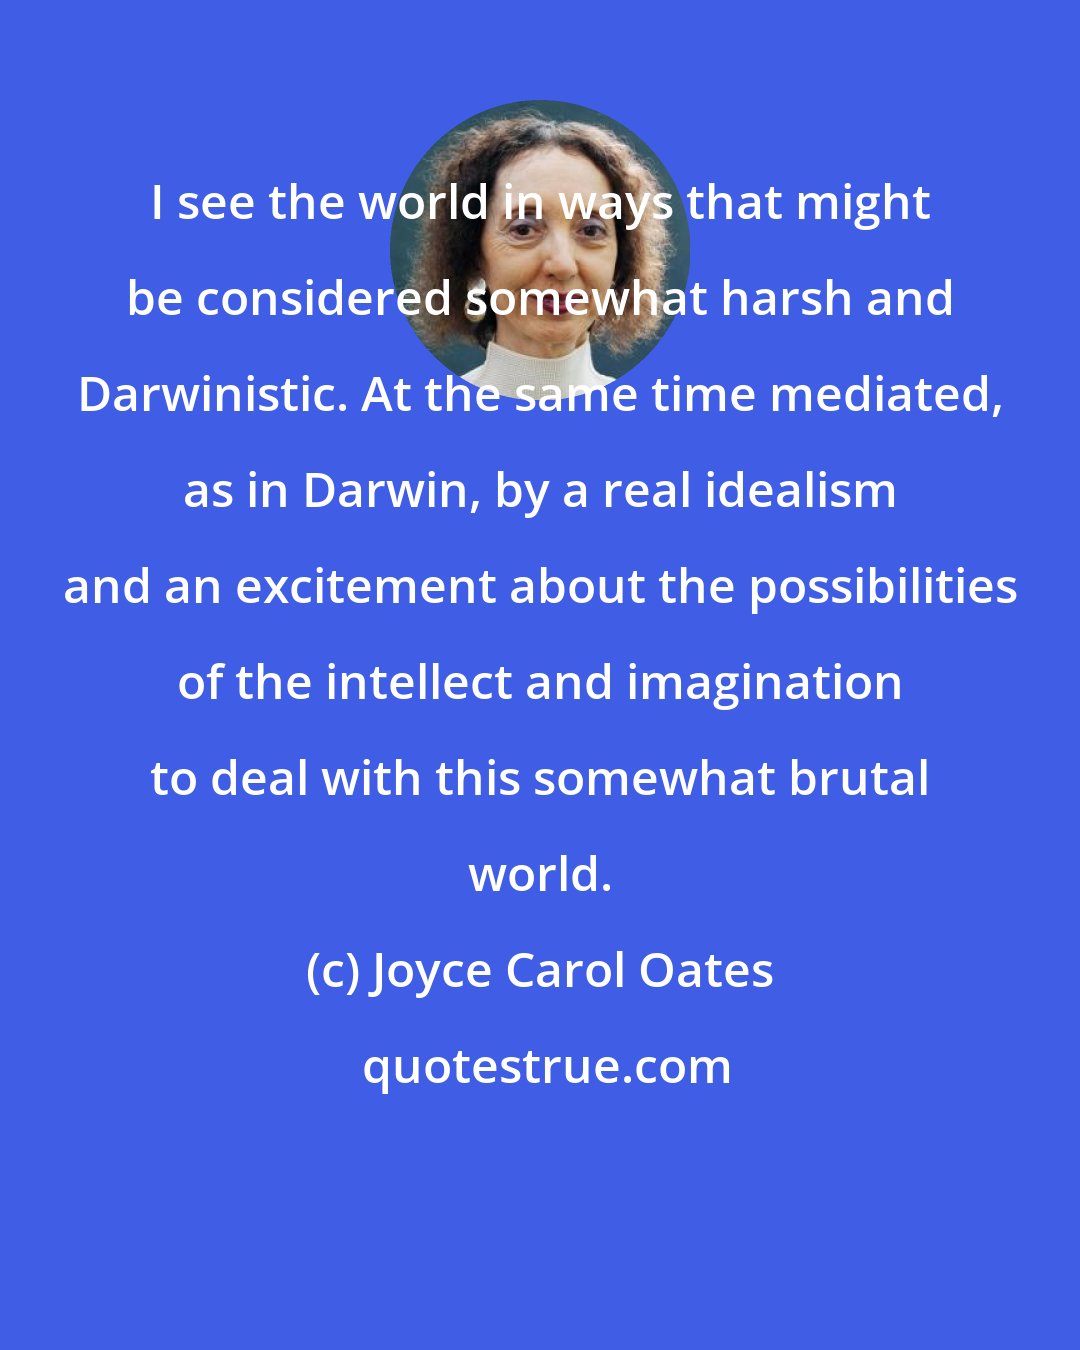 Joyce Carol Oates: I see the world in ways that might be considered somewhat harsh and Darwinistic. At the same time mediated, as in Darwin, by a real idealism and an excitement about the possibilities of the intellect and imagination to deal with this somewhat brutal world.